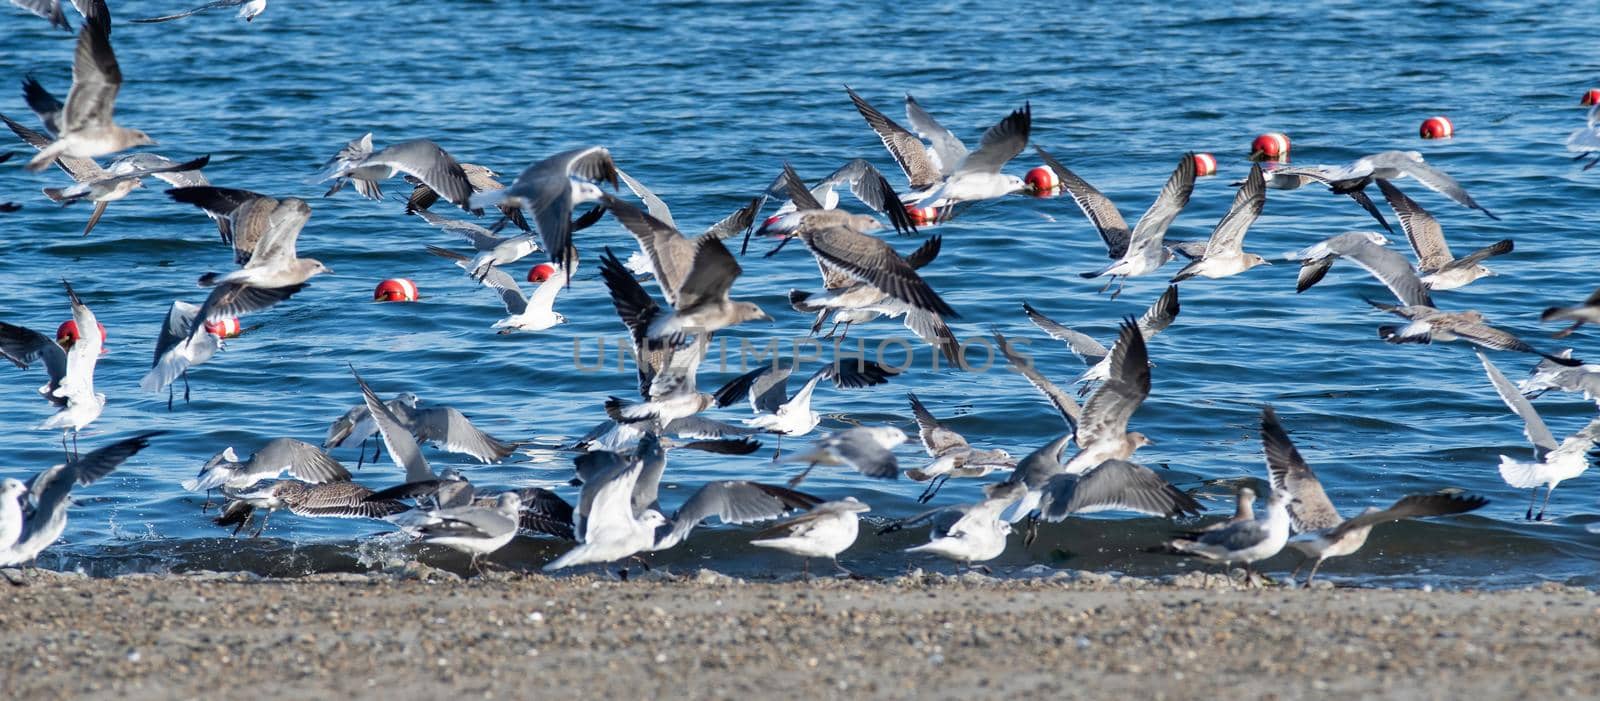 large flock of seagulls on the beach in rhode island